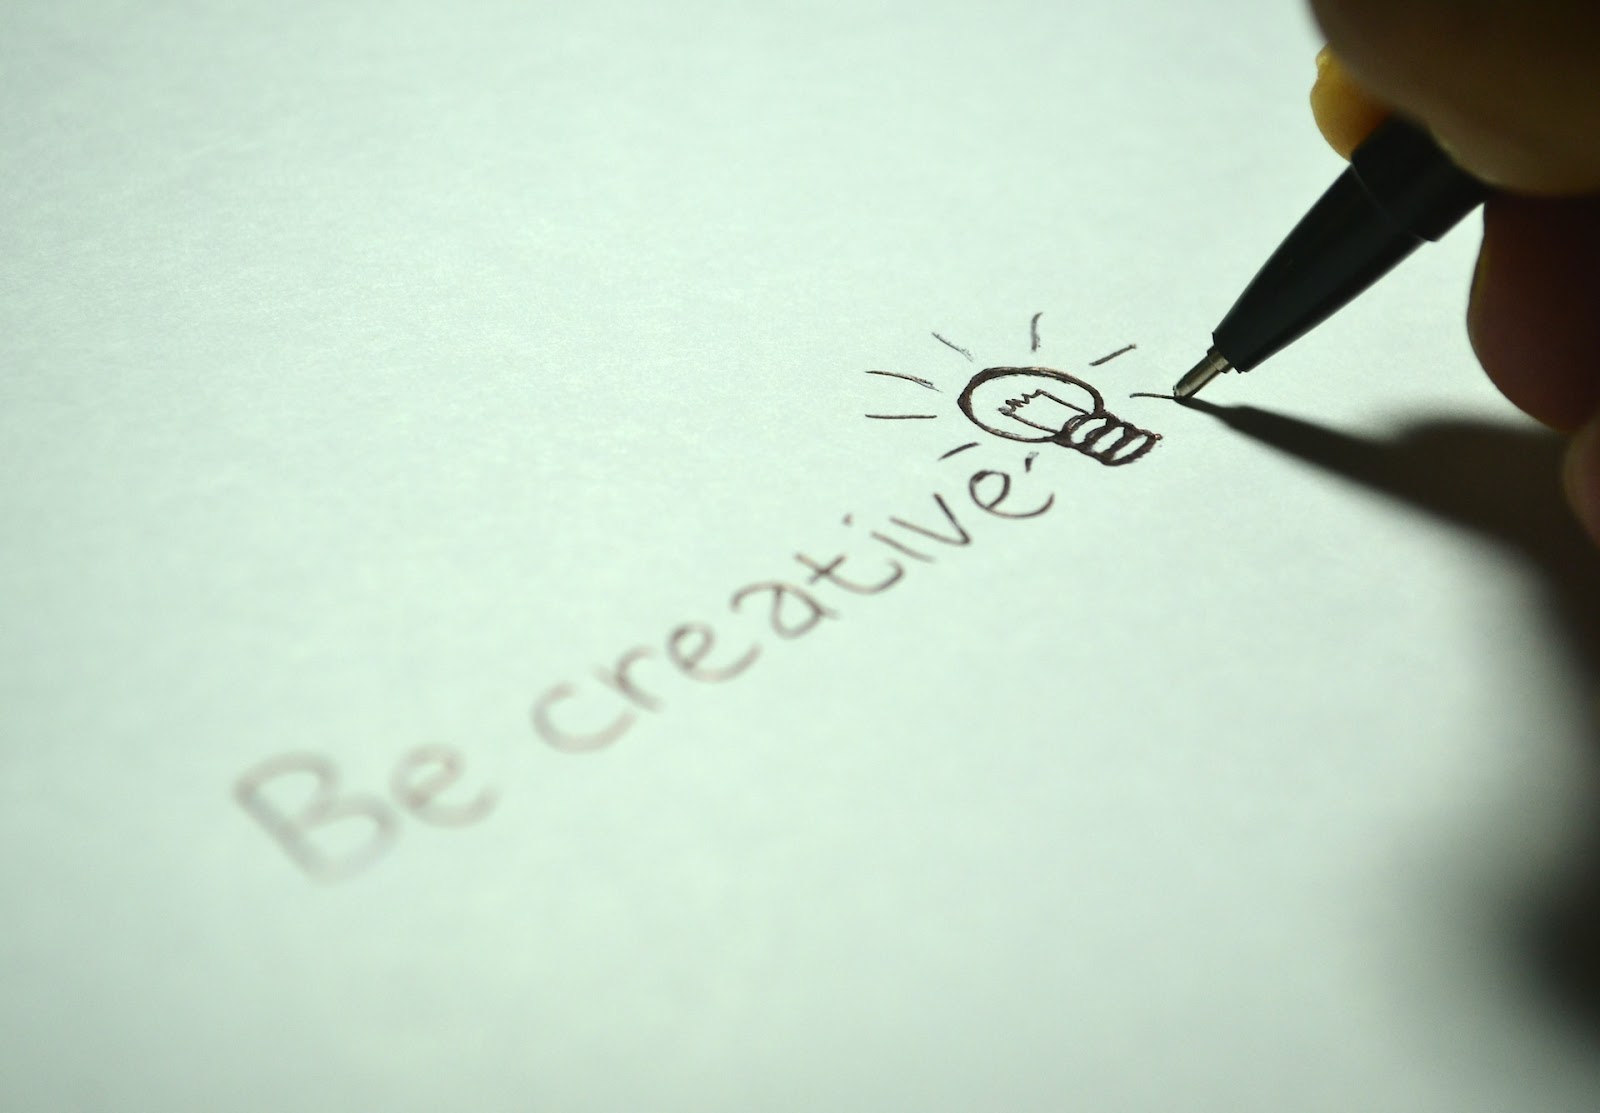 Tips for Coming Up with Innovative Ideas